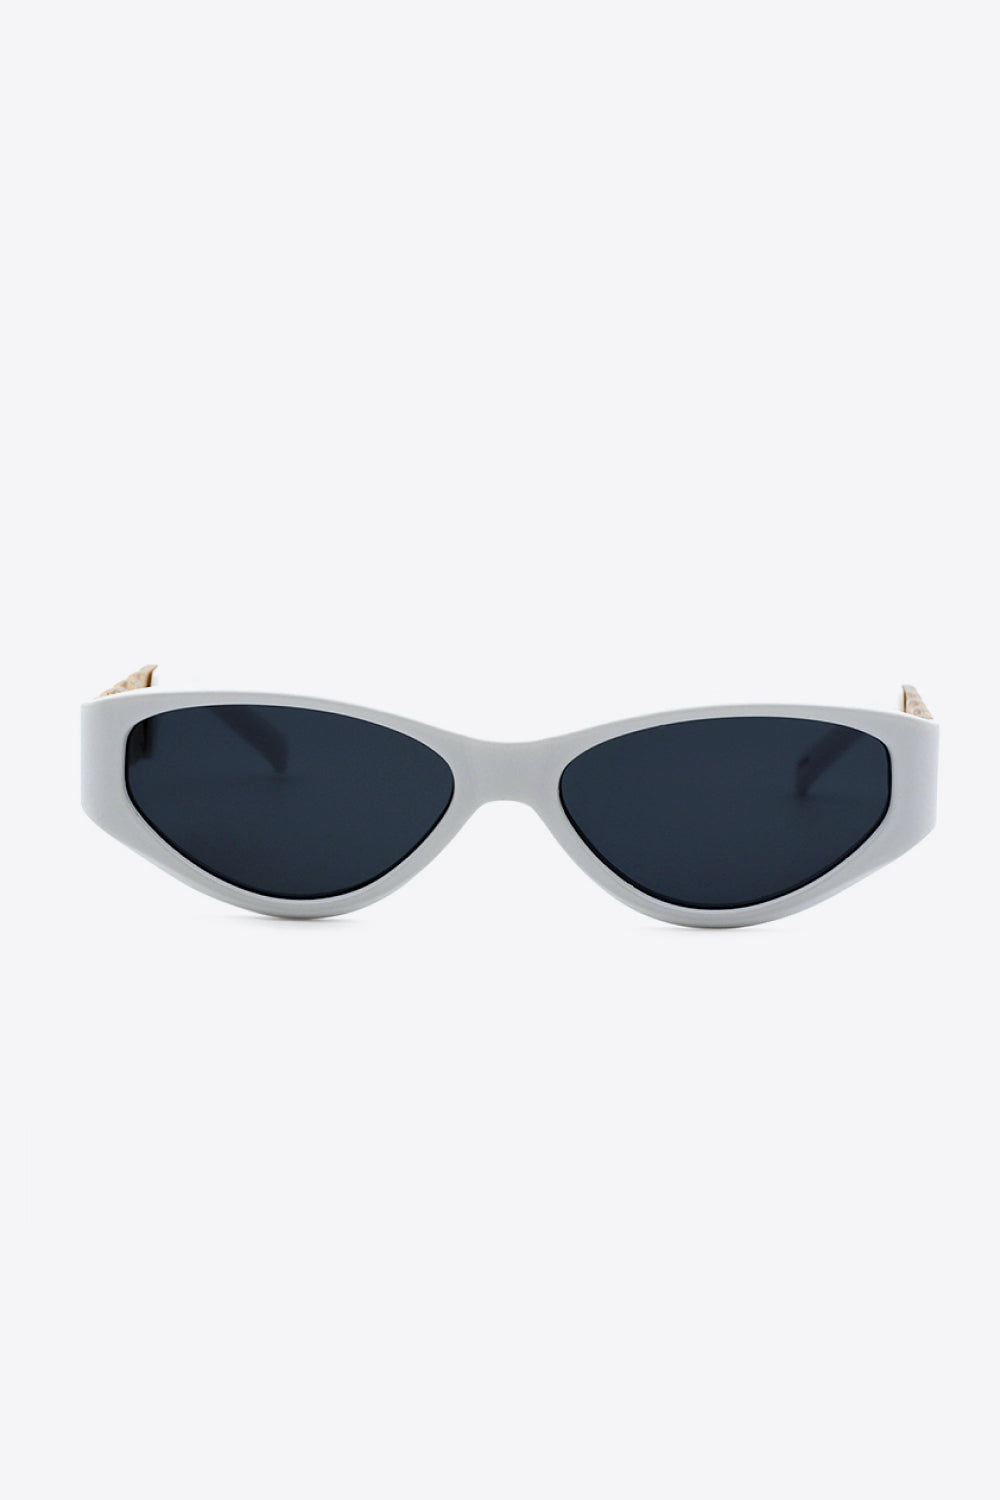 Chain Detail Temple Cat Eye Sunglasses - Sunglasses - FITGGINS